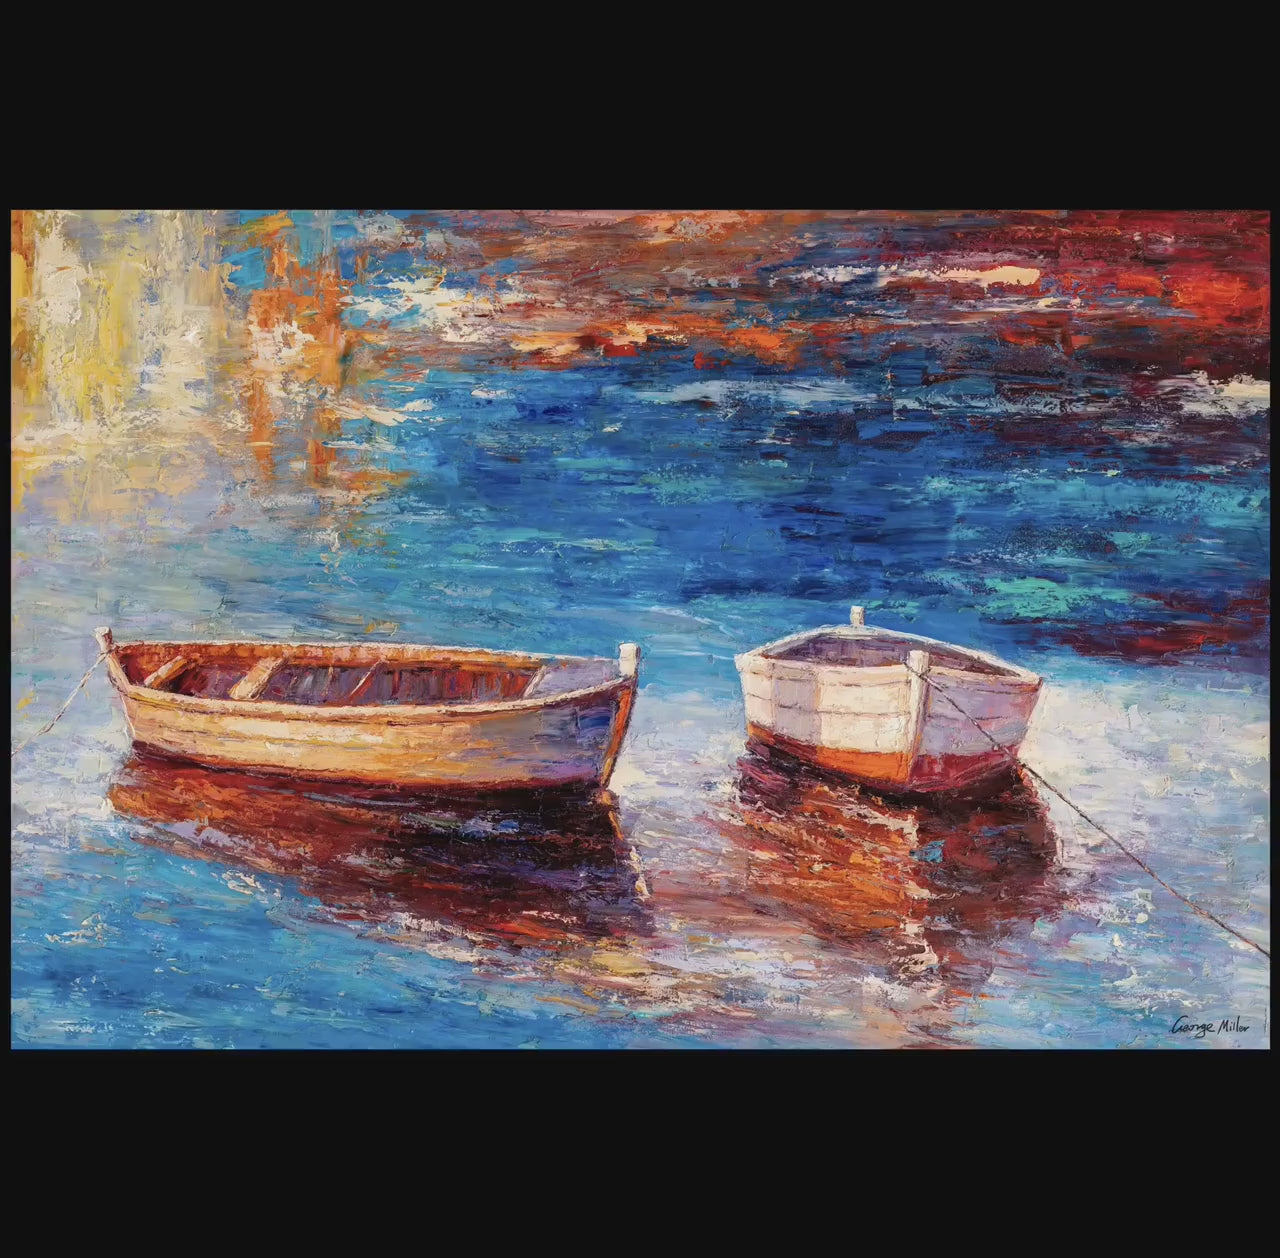 Large Oil Painting Fishing Boats - Contemporary Seascape Art | 32x48 inches Palette Knife Textured | Ready to Hang, Living Room Wall Art